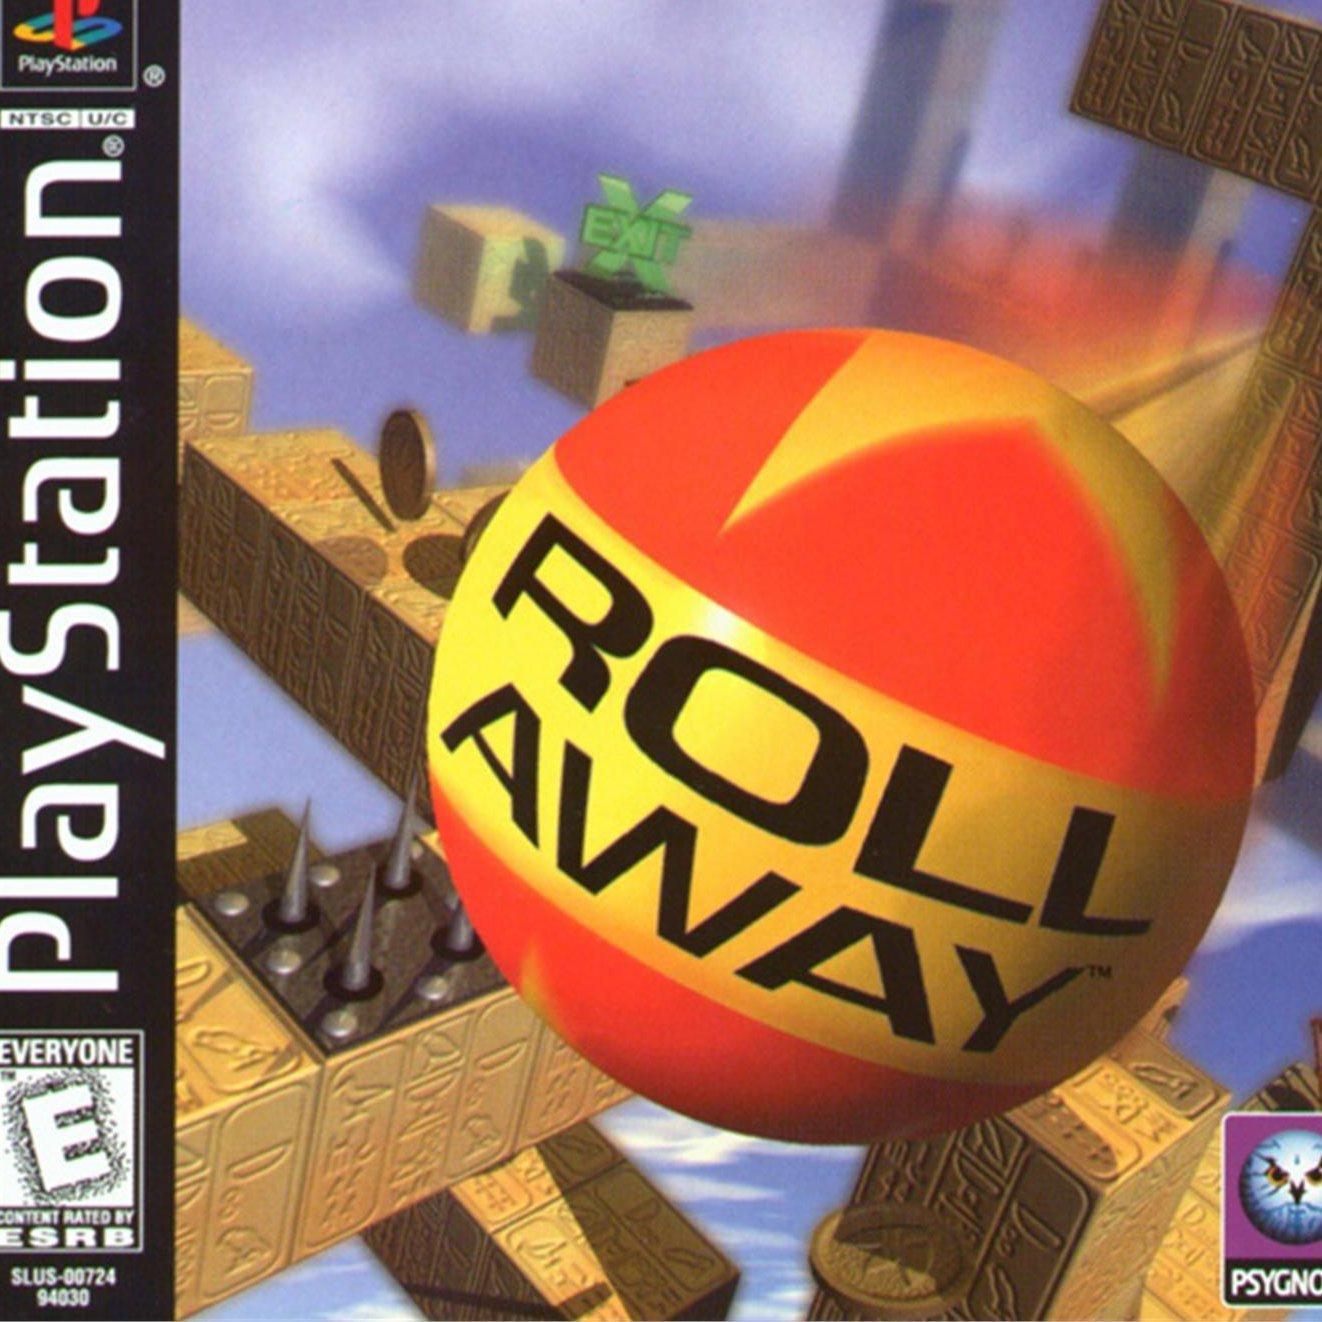 Roll Away psx download